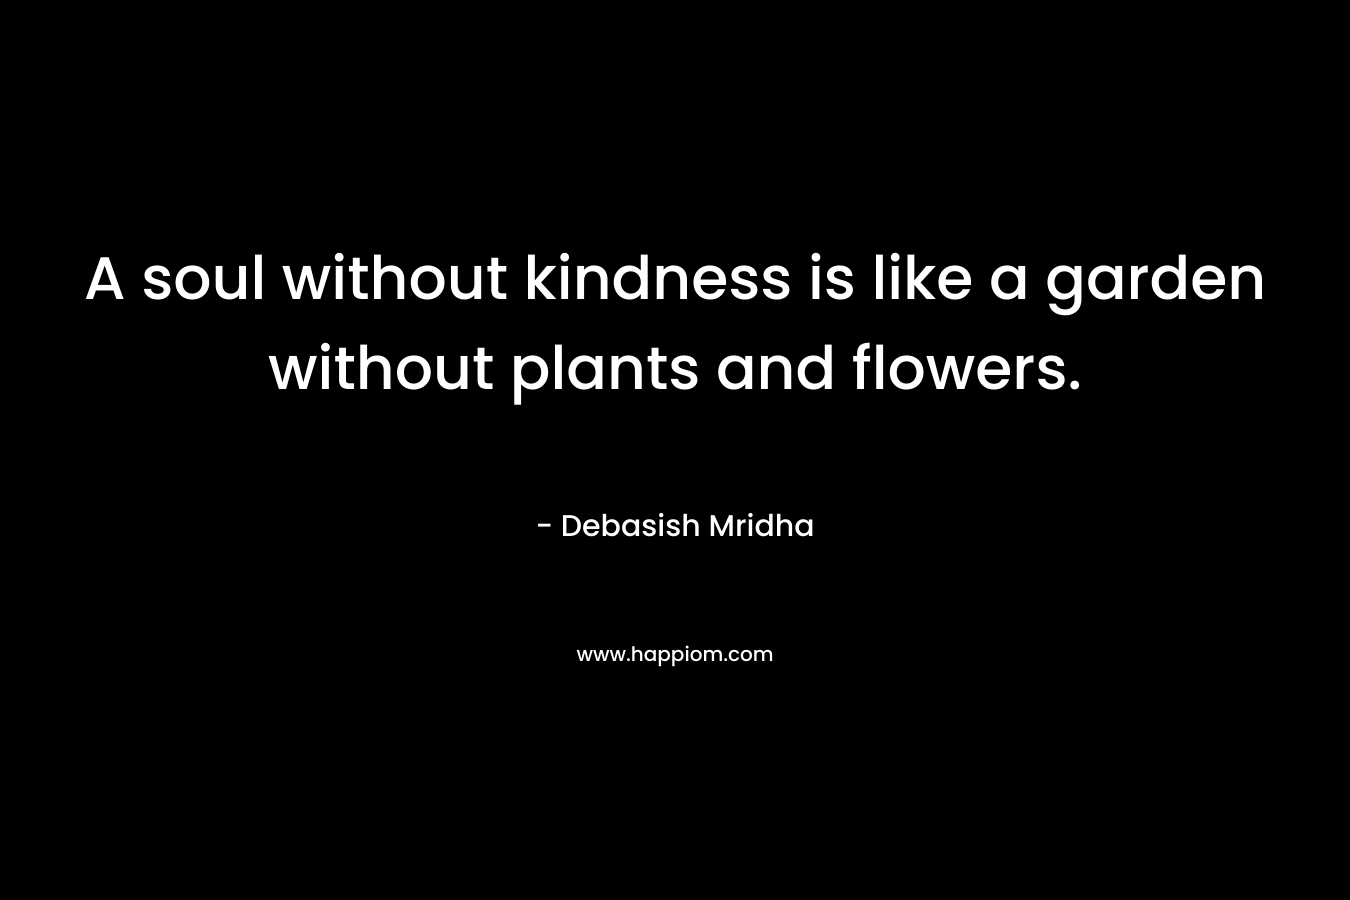 A soul without kindness is like a garden without plants and flowers.